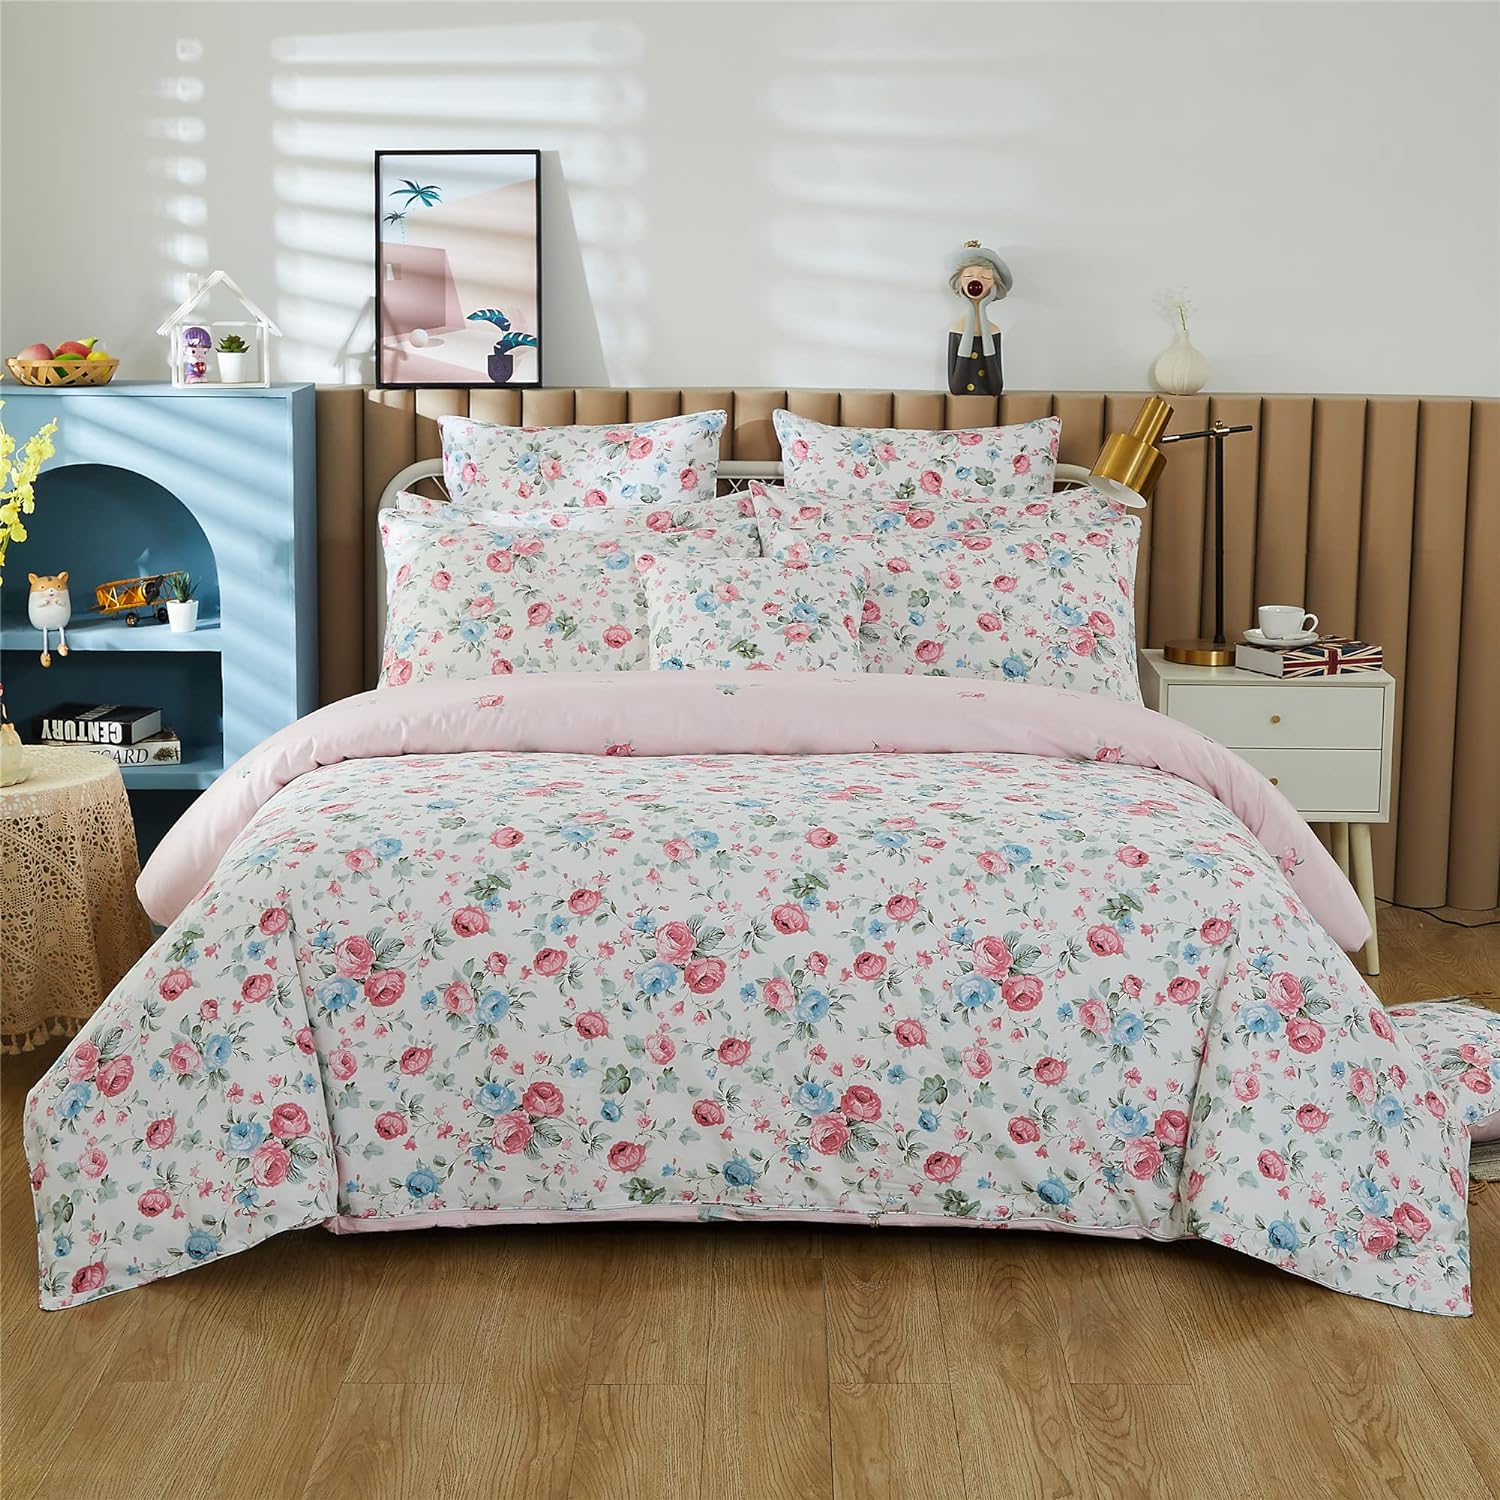 FADFAY Pink Rose Floral Duvet Cover Queen Shabby White Floral Bedding Vintage Rose Flower Girls Bedding Farmhouse Bedding 100% Cotton Comforter Cover Set with Hidden Zipper Closure 3Pcs, Queen Size